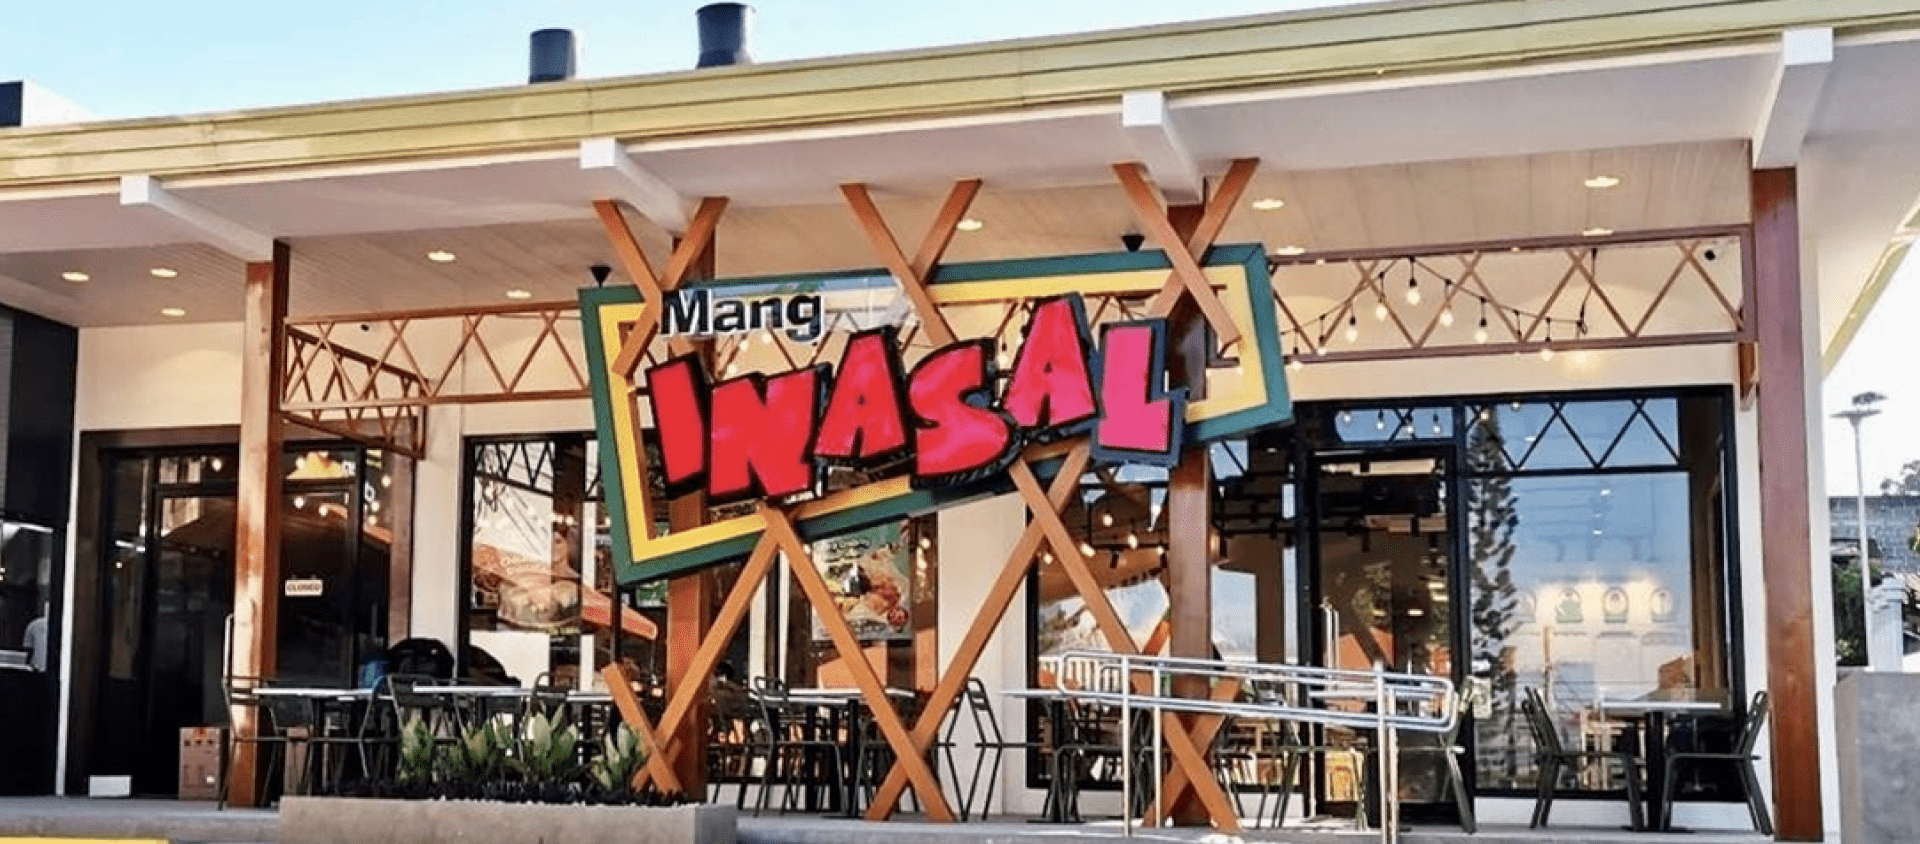 Mang Inasal is open this Holy Week